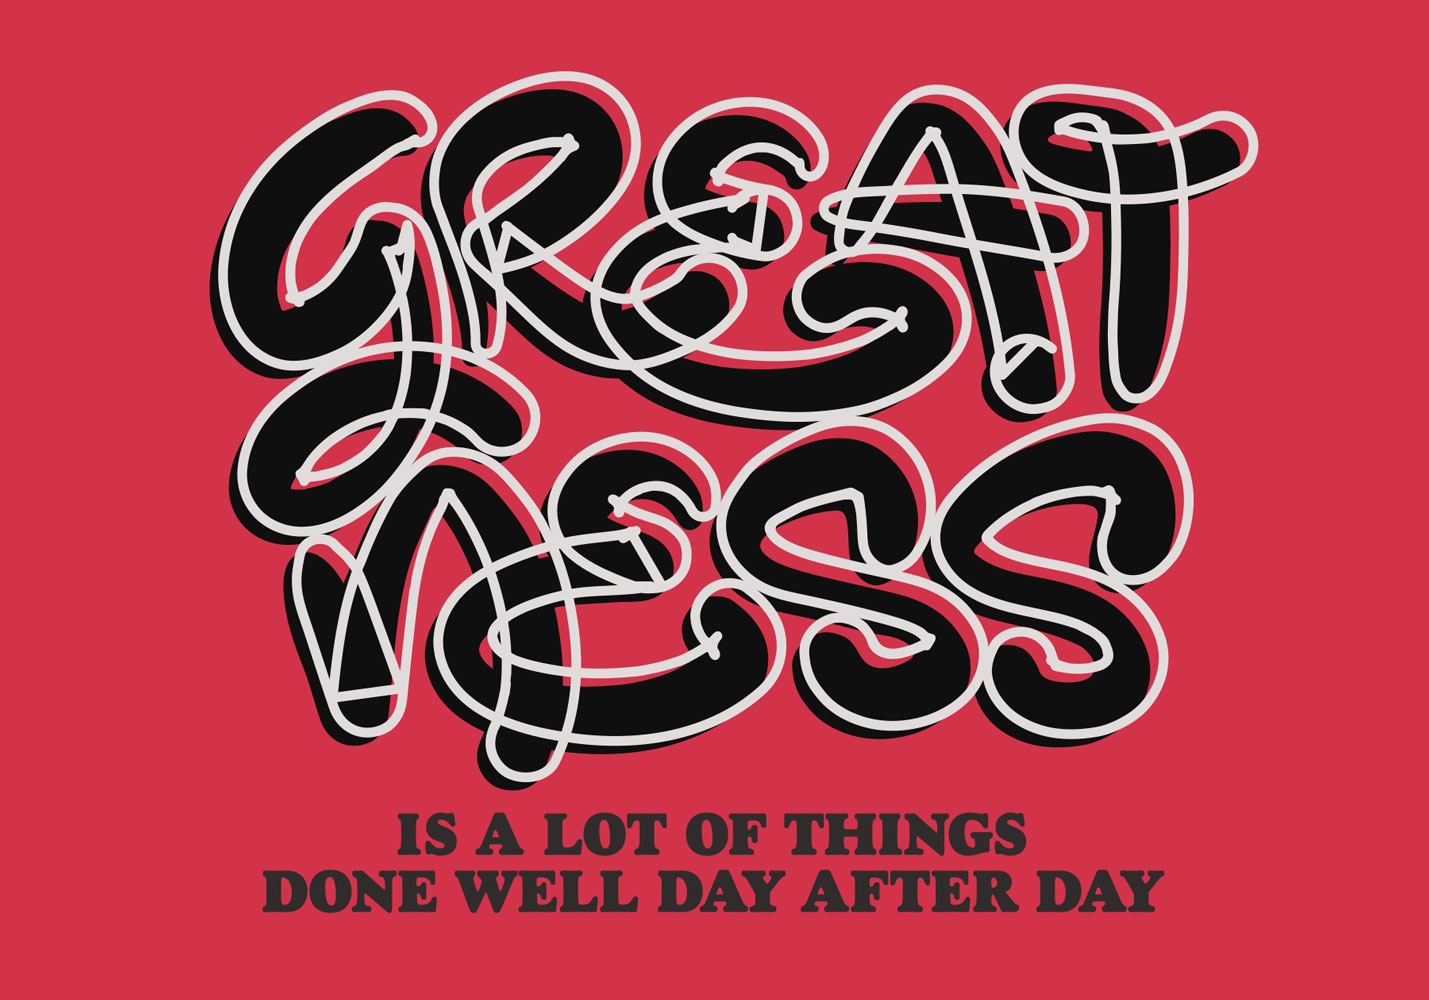 greatness_poster_H